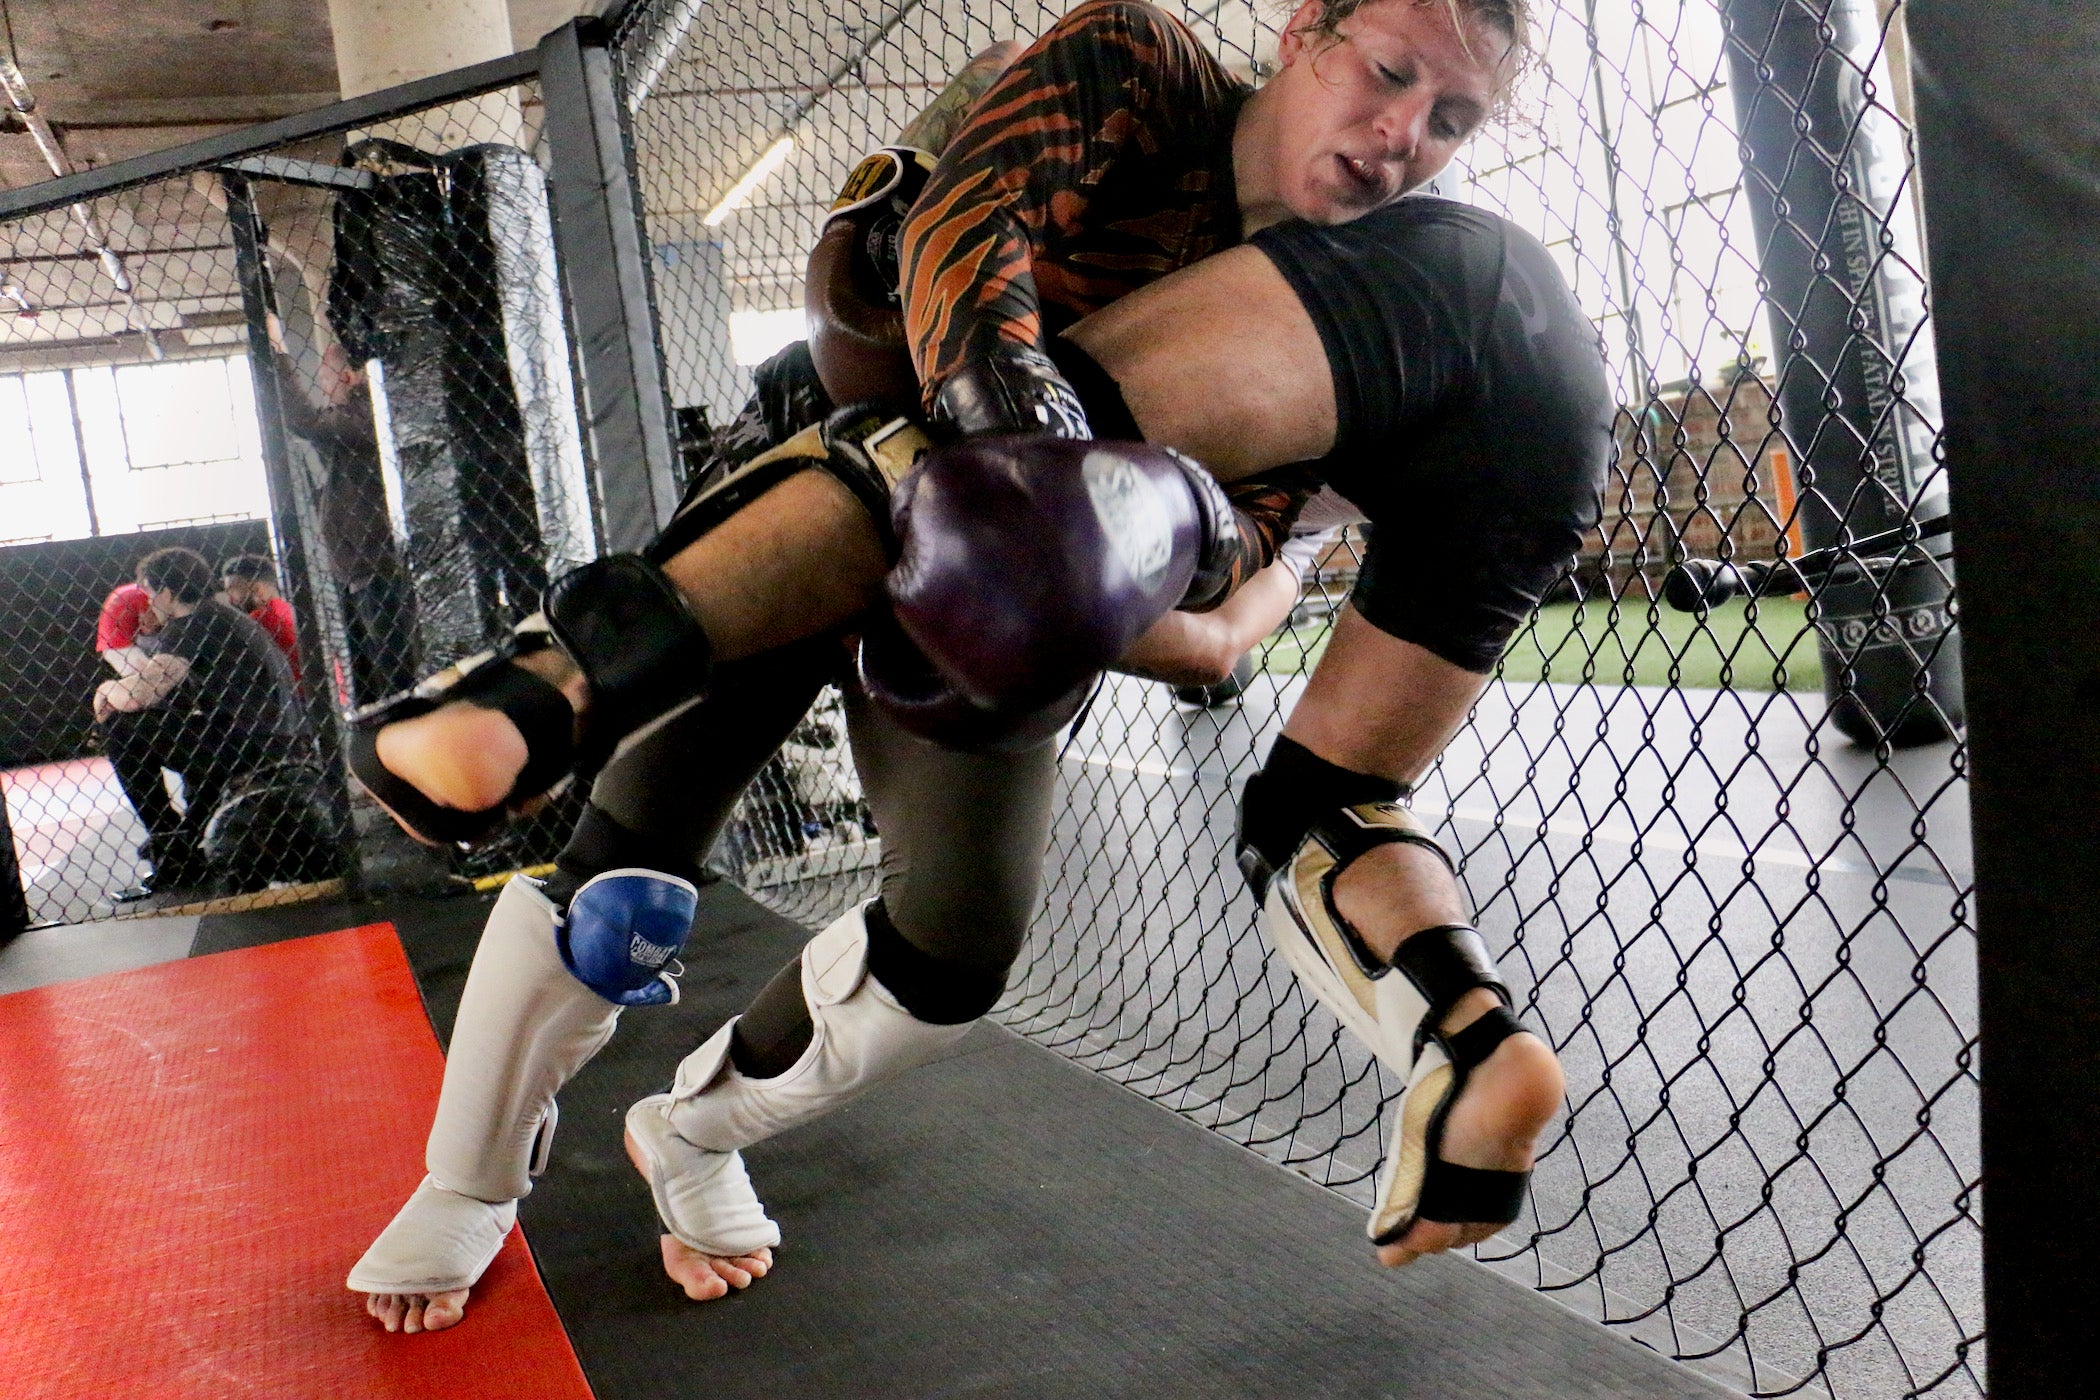 Philly woman fighting for MMA championship